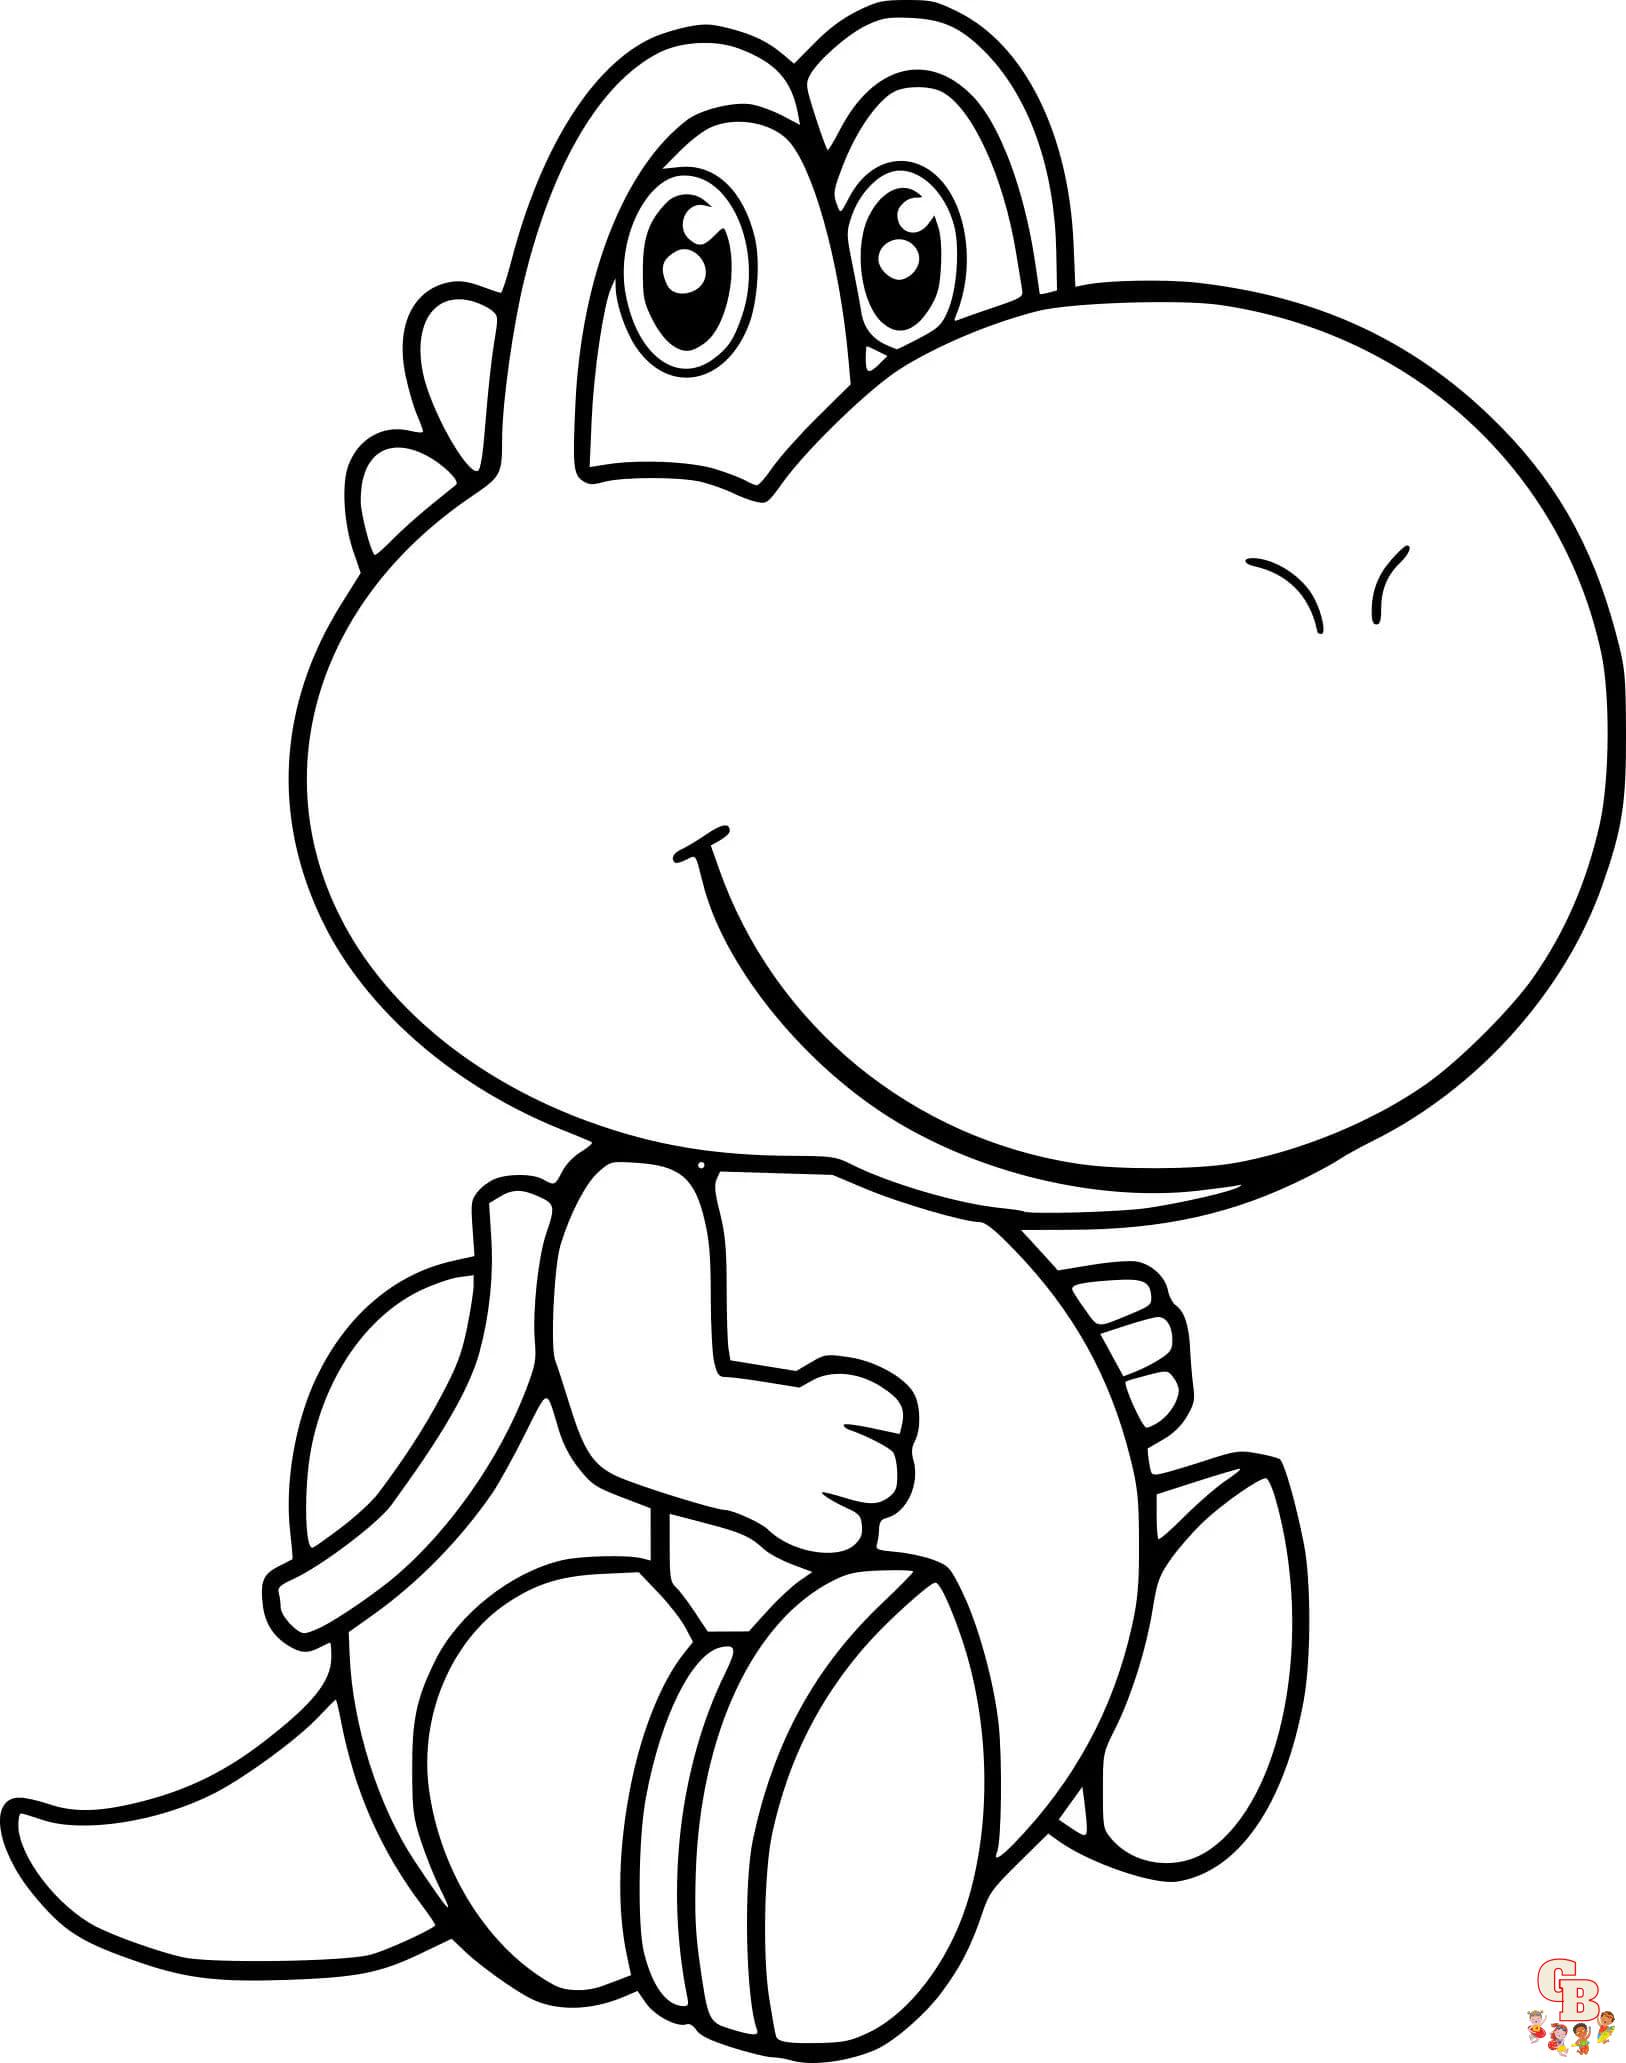 Cute Yoshi coloring pages easy